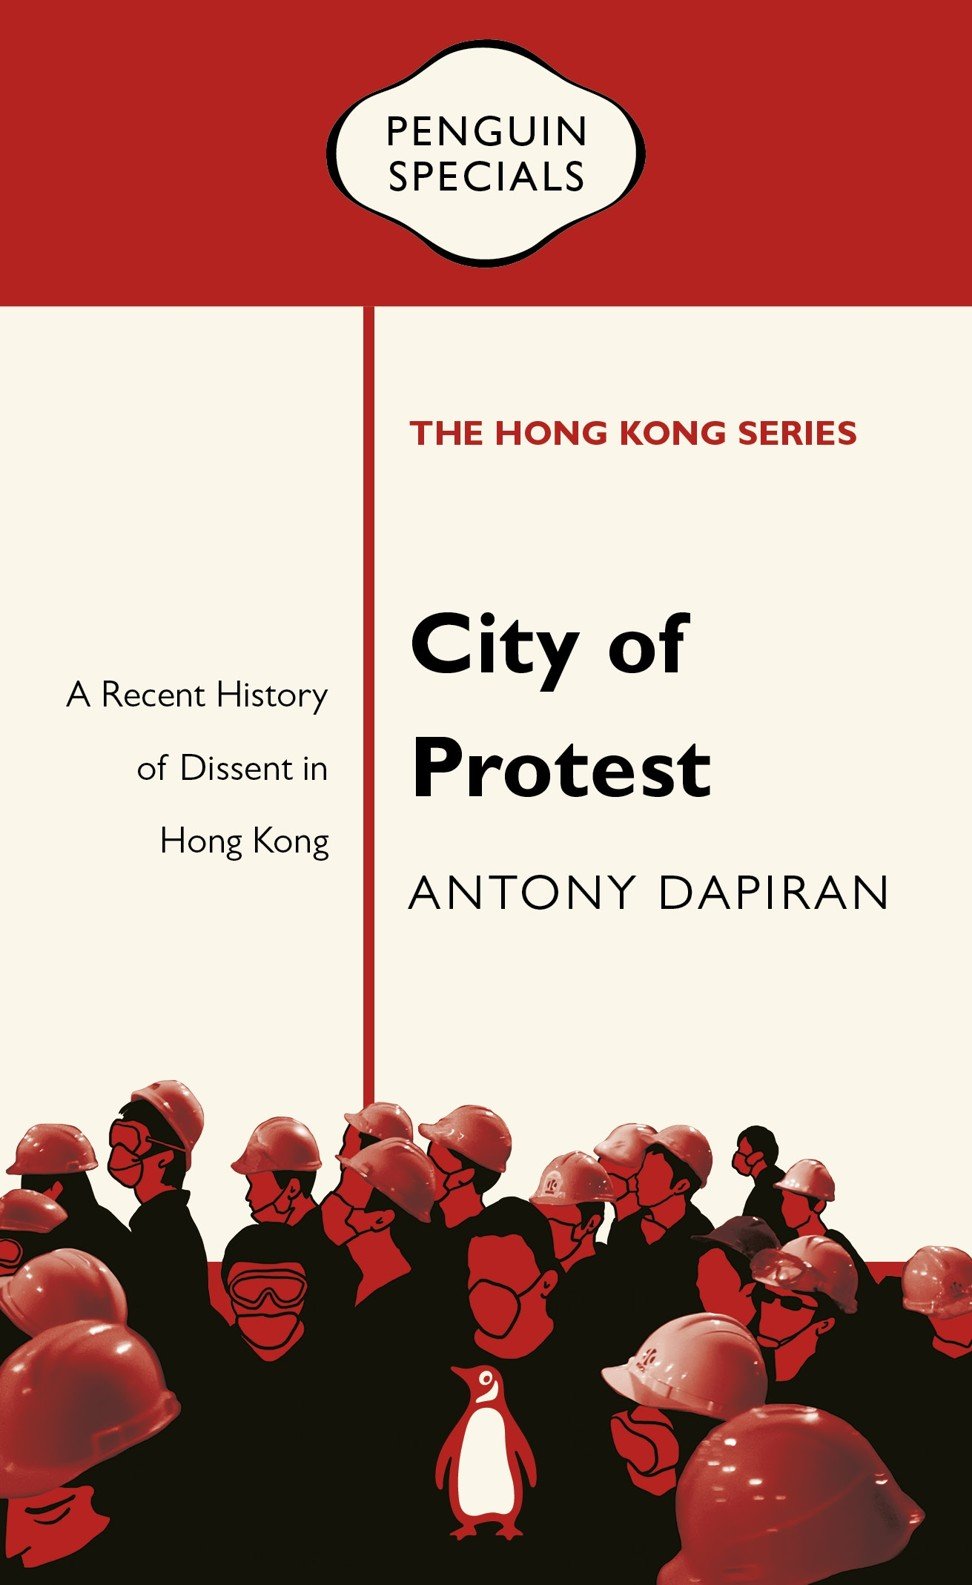 Antony Dapiran’s City of Protest: A Recent History of Dissent in Hong Kong.